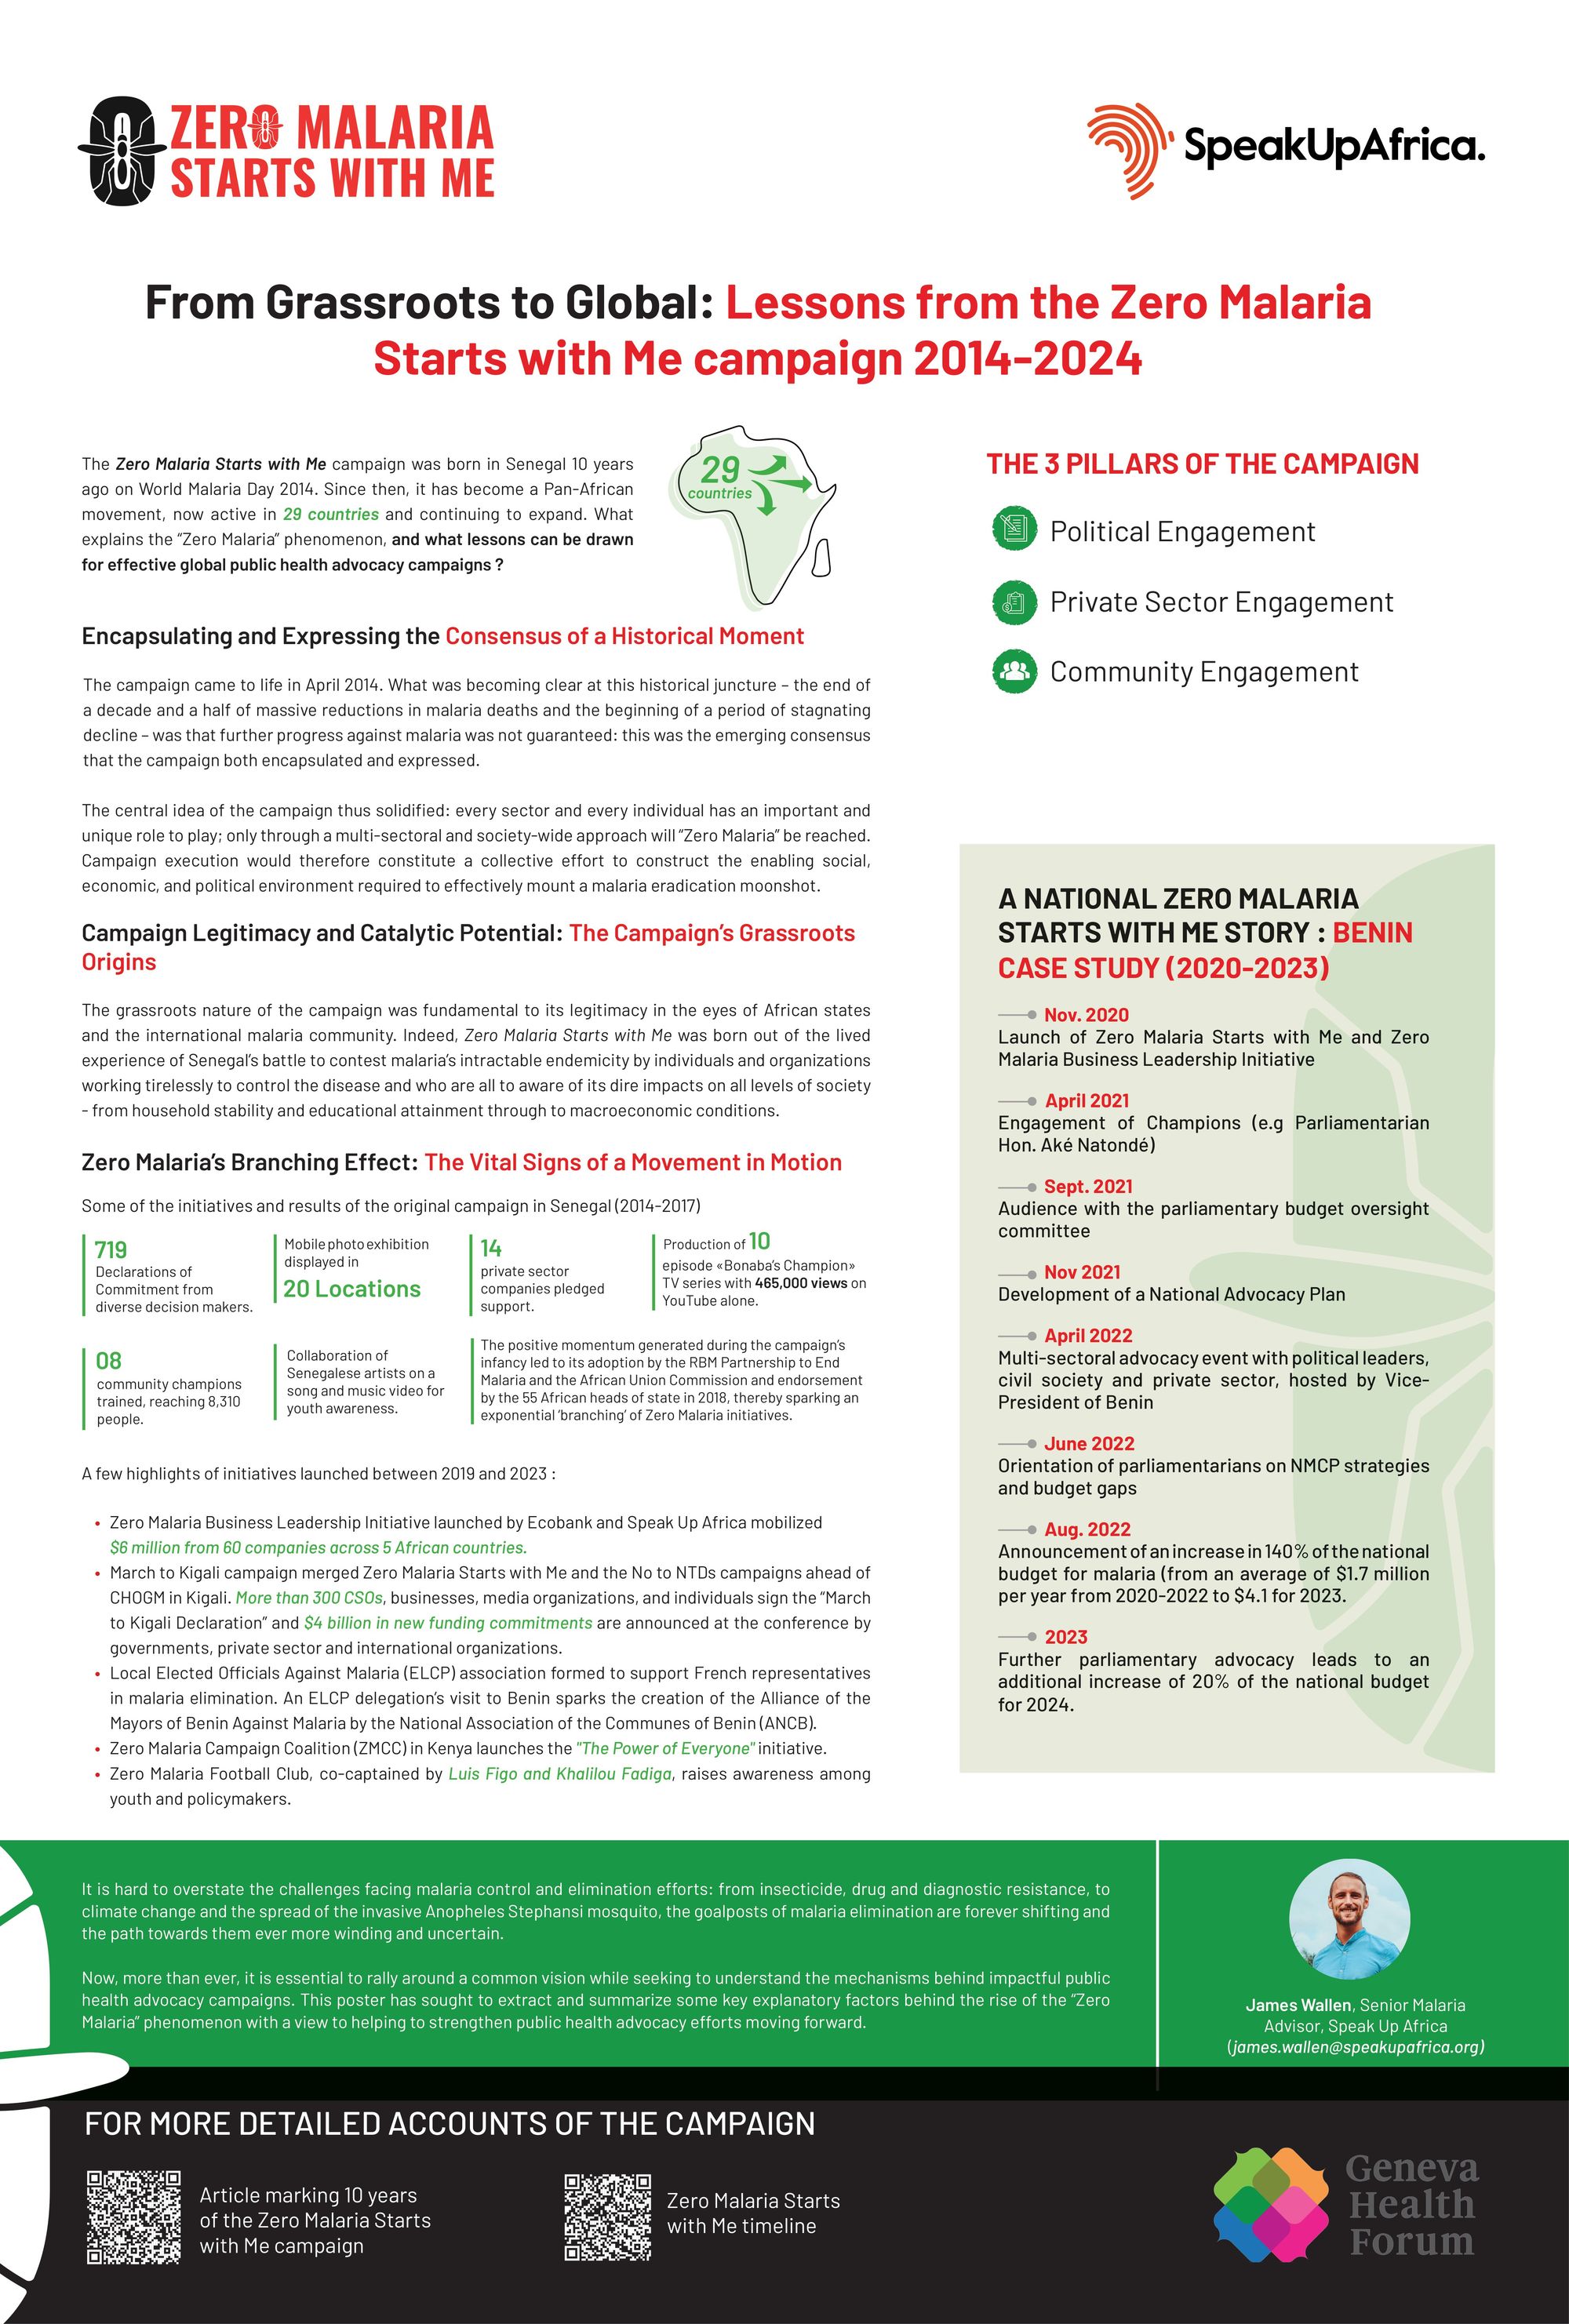 From Grassroots to Global (and back): Lessons from the Zero Malaria Starts with Me campaign 2014-2024